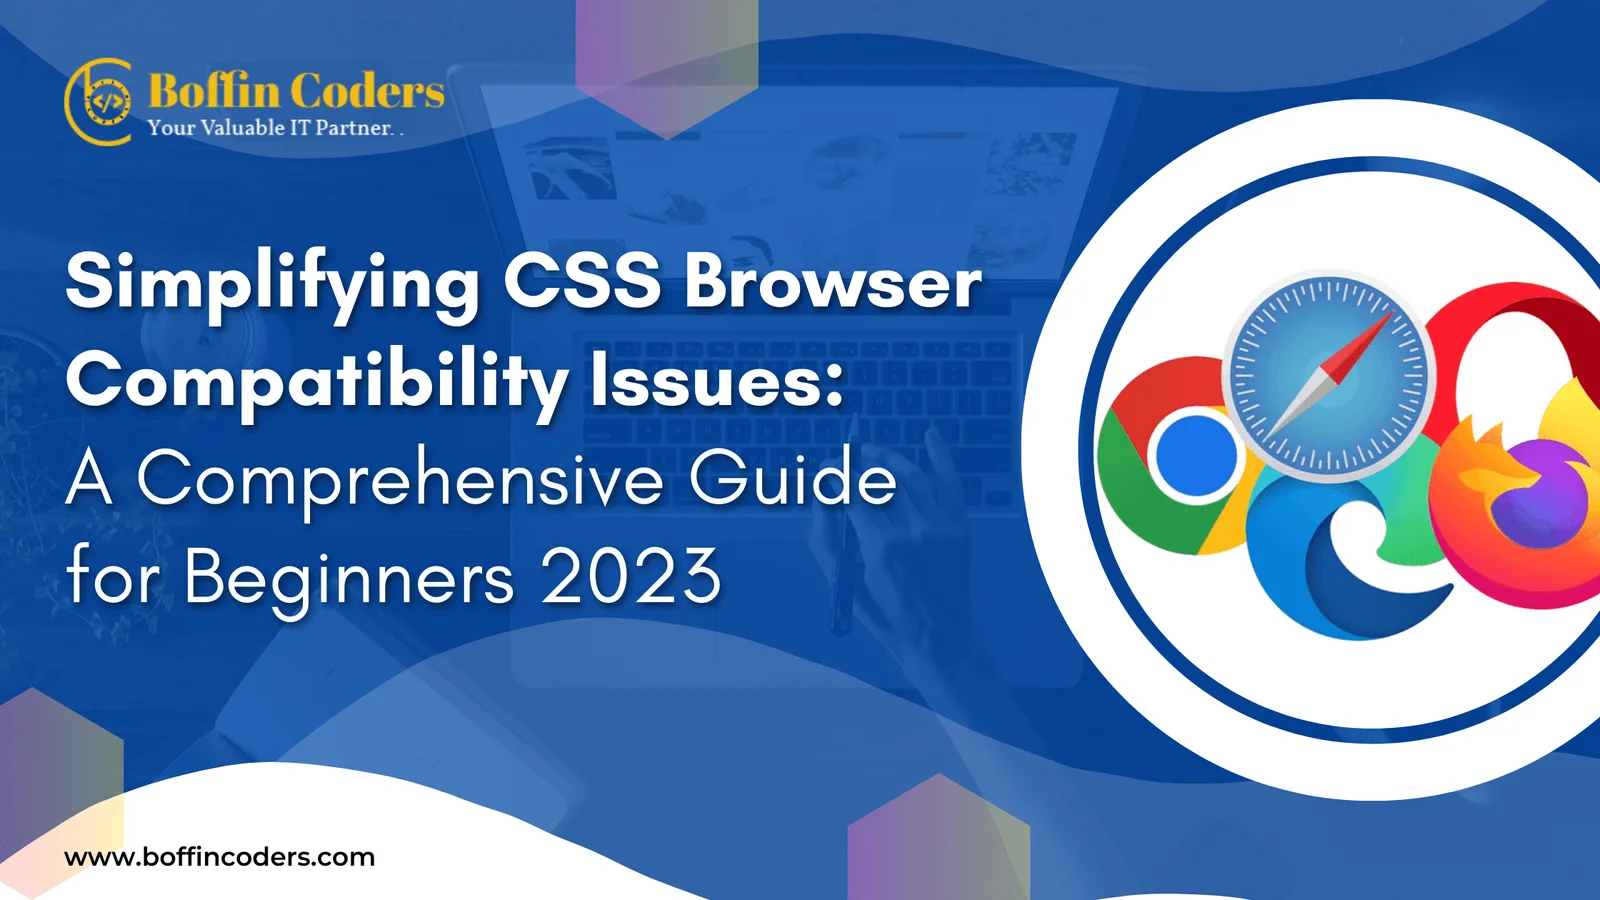 Simplifying-CSS-Browser-Compatibility-Issues-A-Comprehensive-Guide-for-Beginners-2023